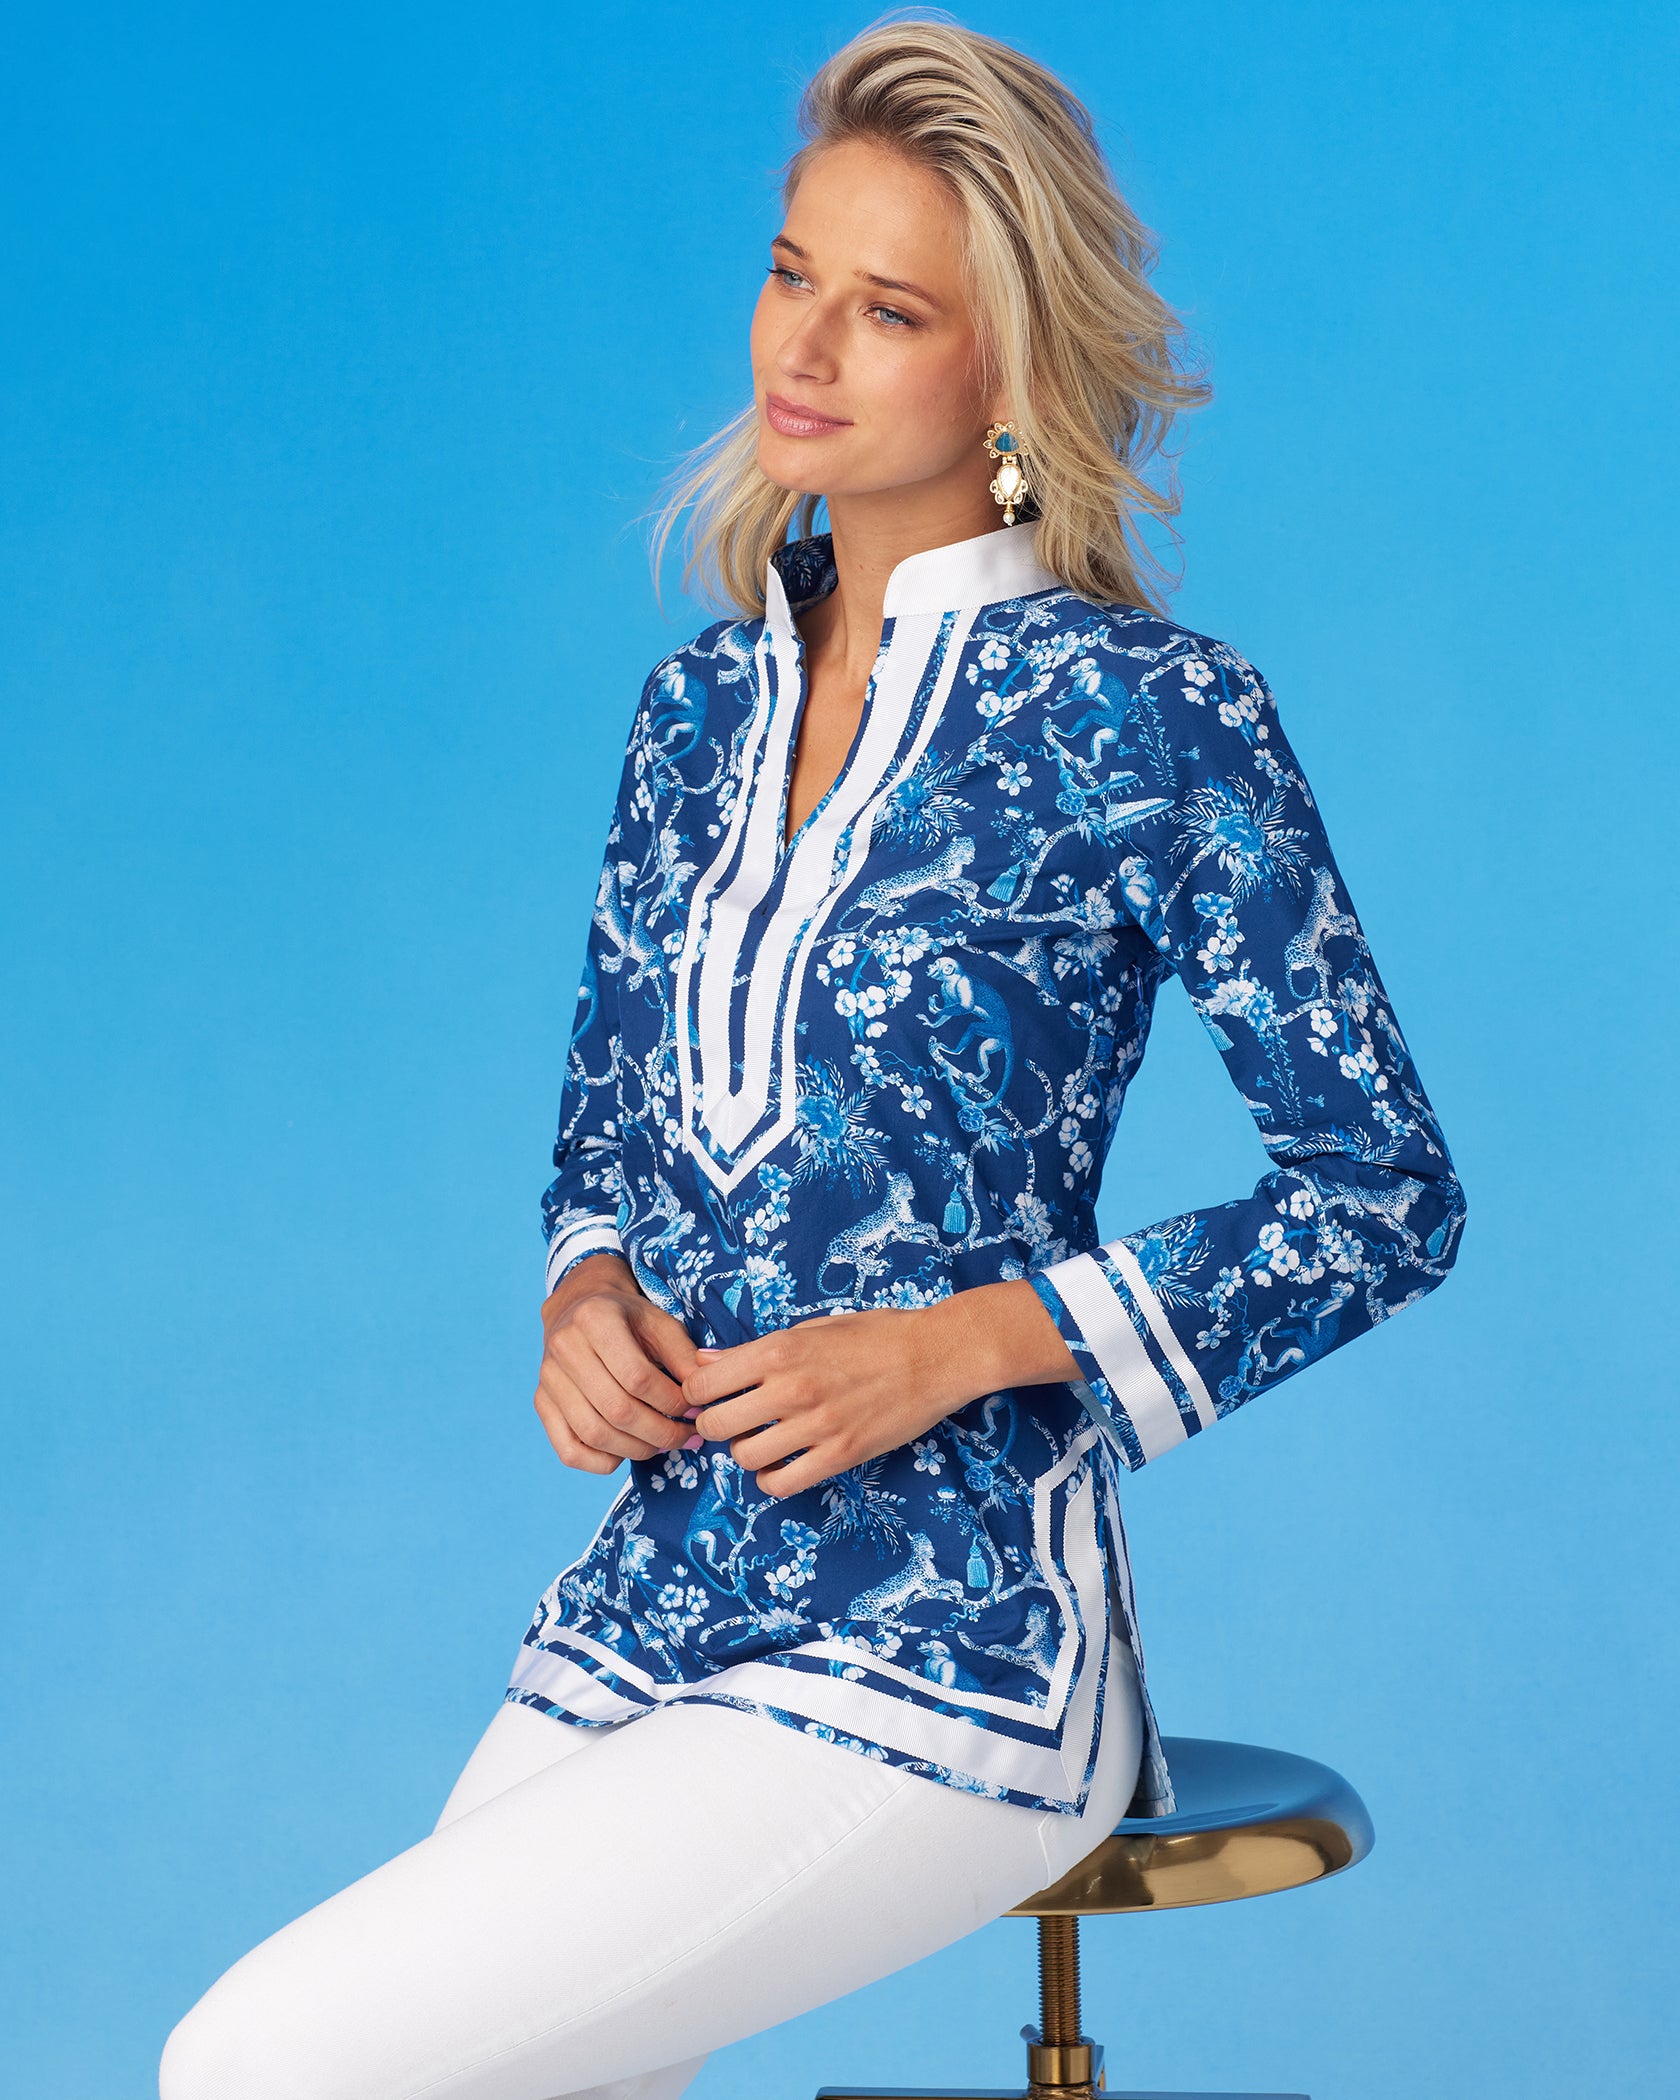 Capri Tunic in Whimsical Jungle Toile in Blue and White-Sitting